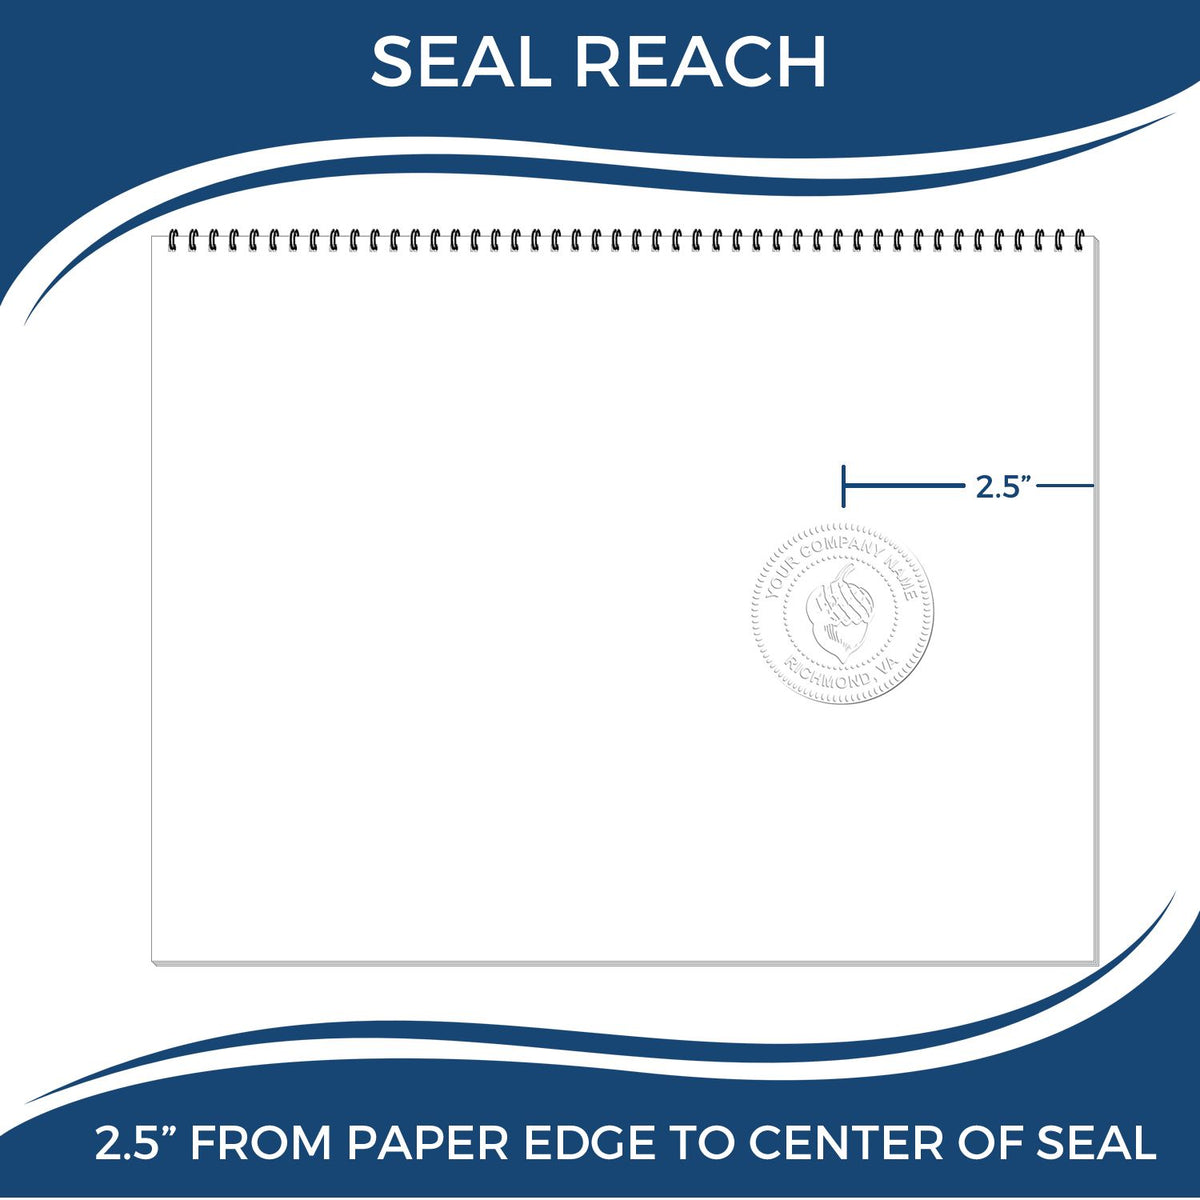 An infographic showing the seal reach which is represented by a ruler and a miniature seal image of the Heavy Duty Cast Iron Oklahoma Geologist Seal Embosser